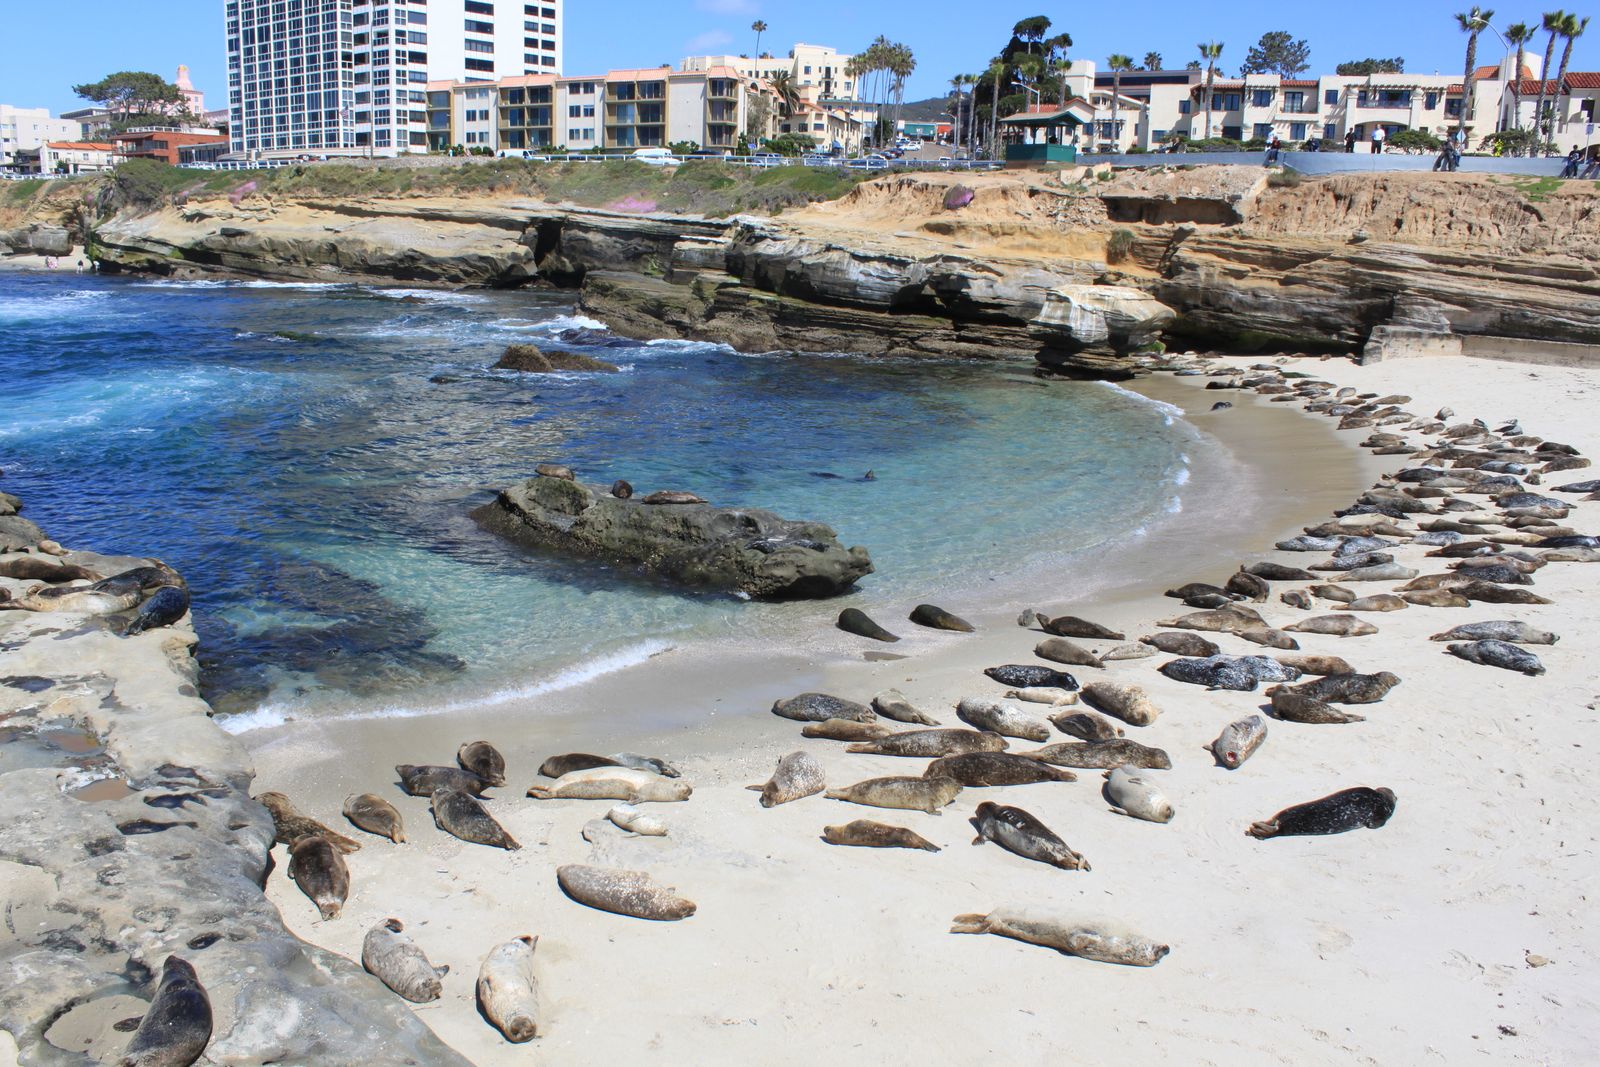 Seals at Children's Pool in La Jolla fight for their place on the sand